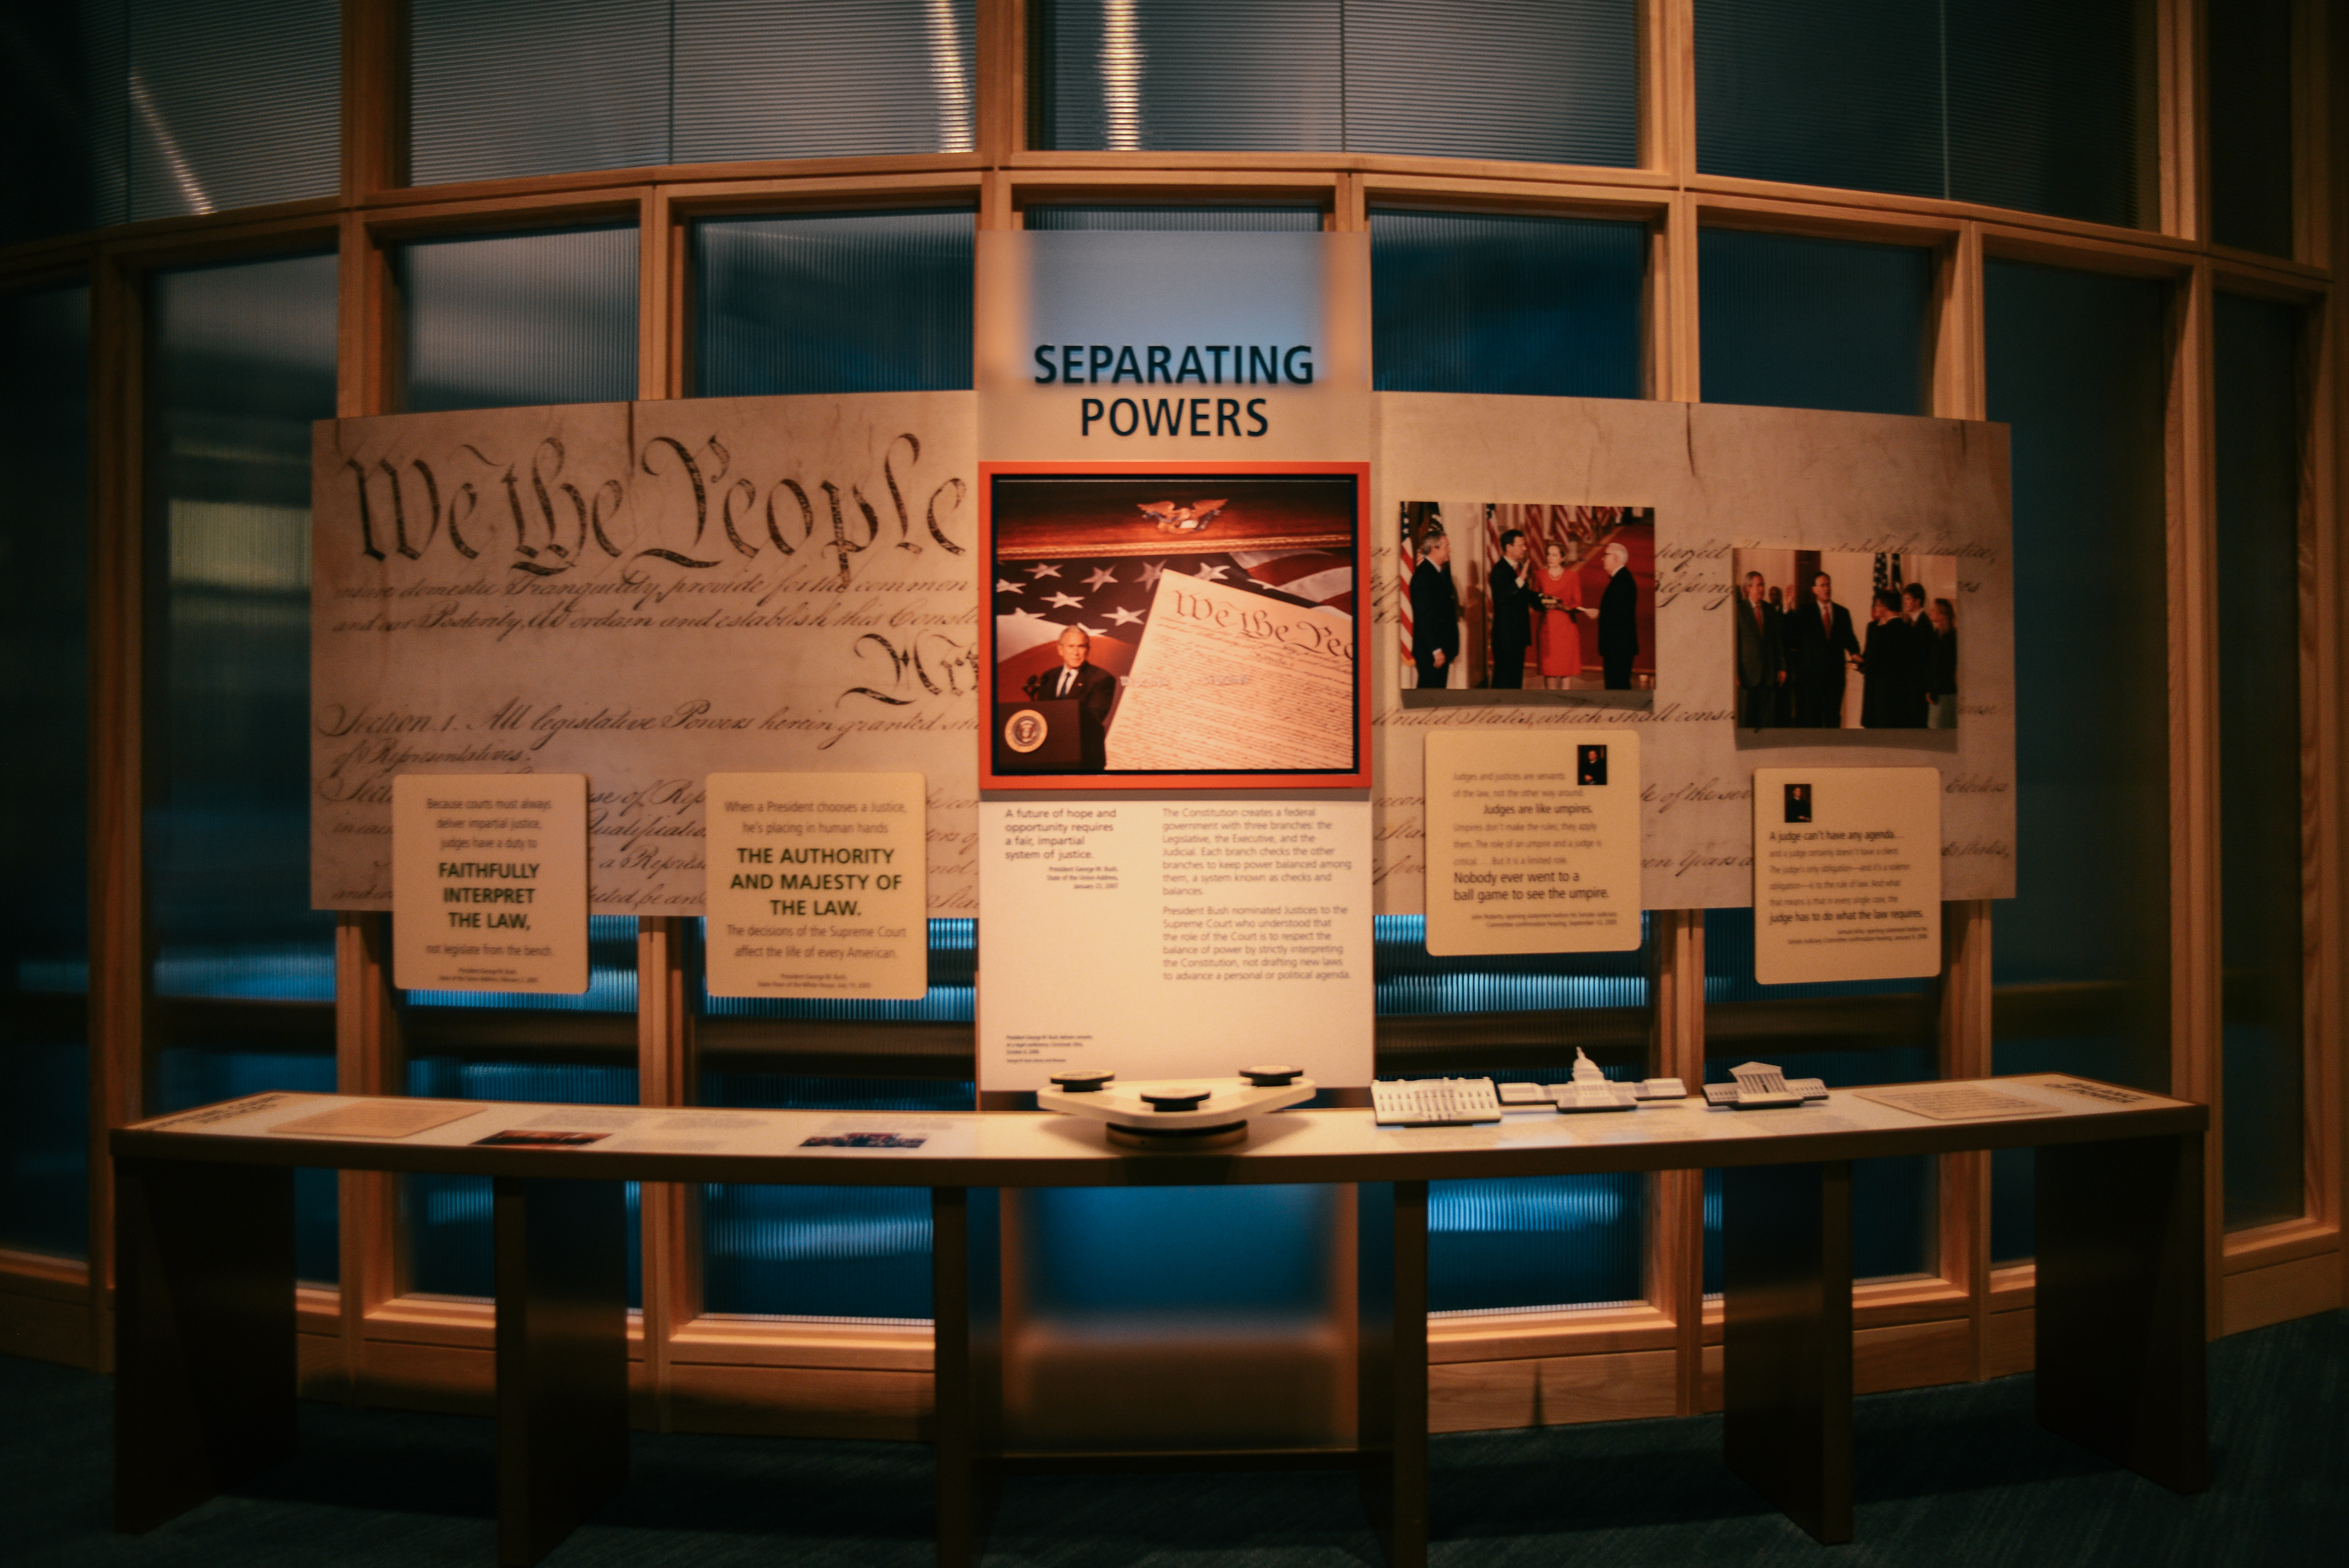 An image of the Separating Powers display at the George W Bush Museum